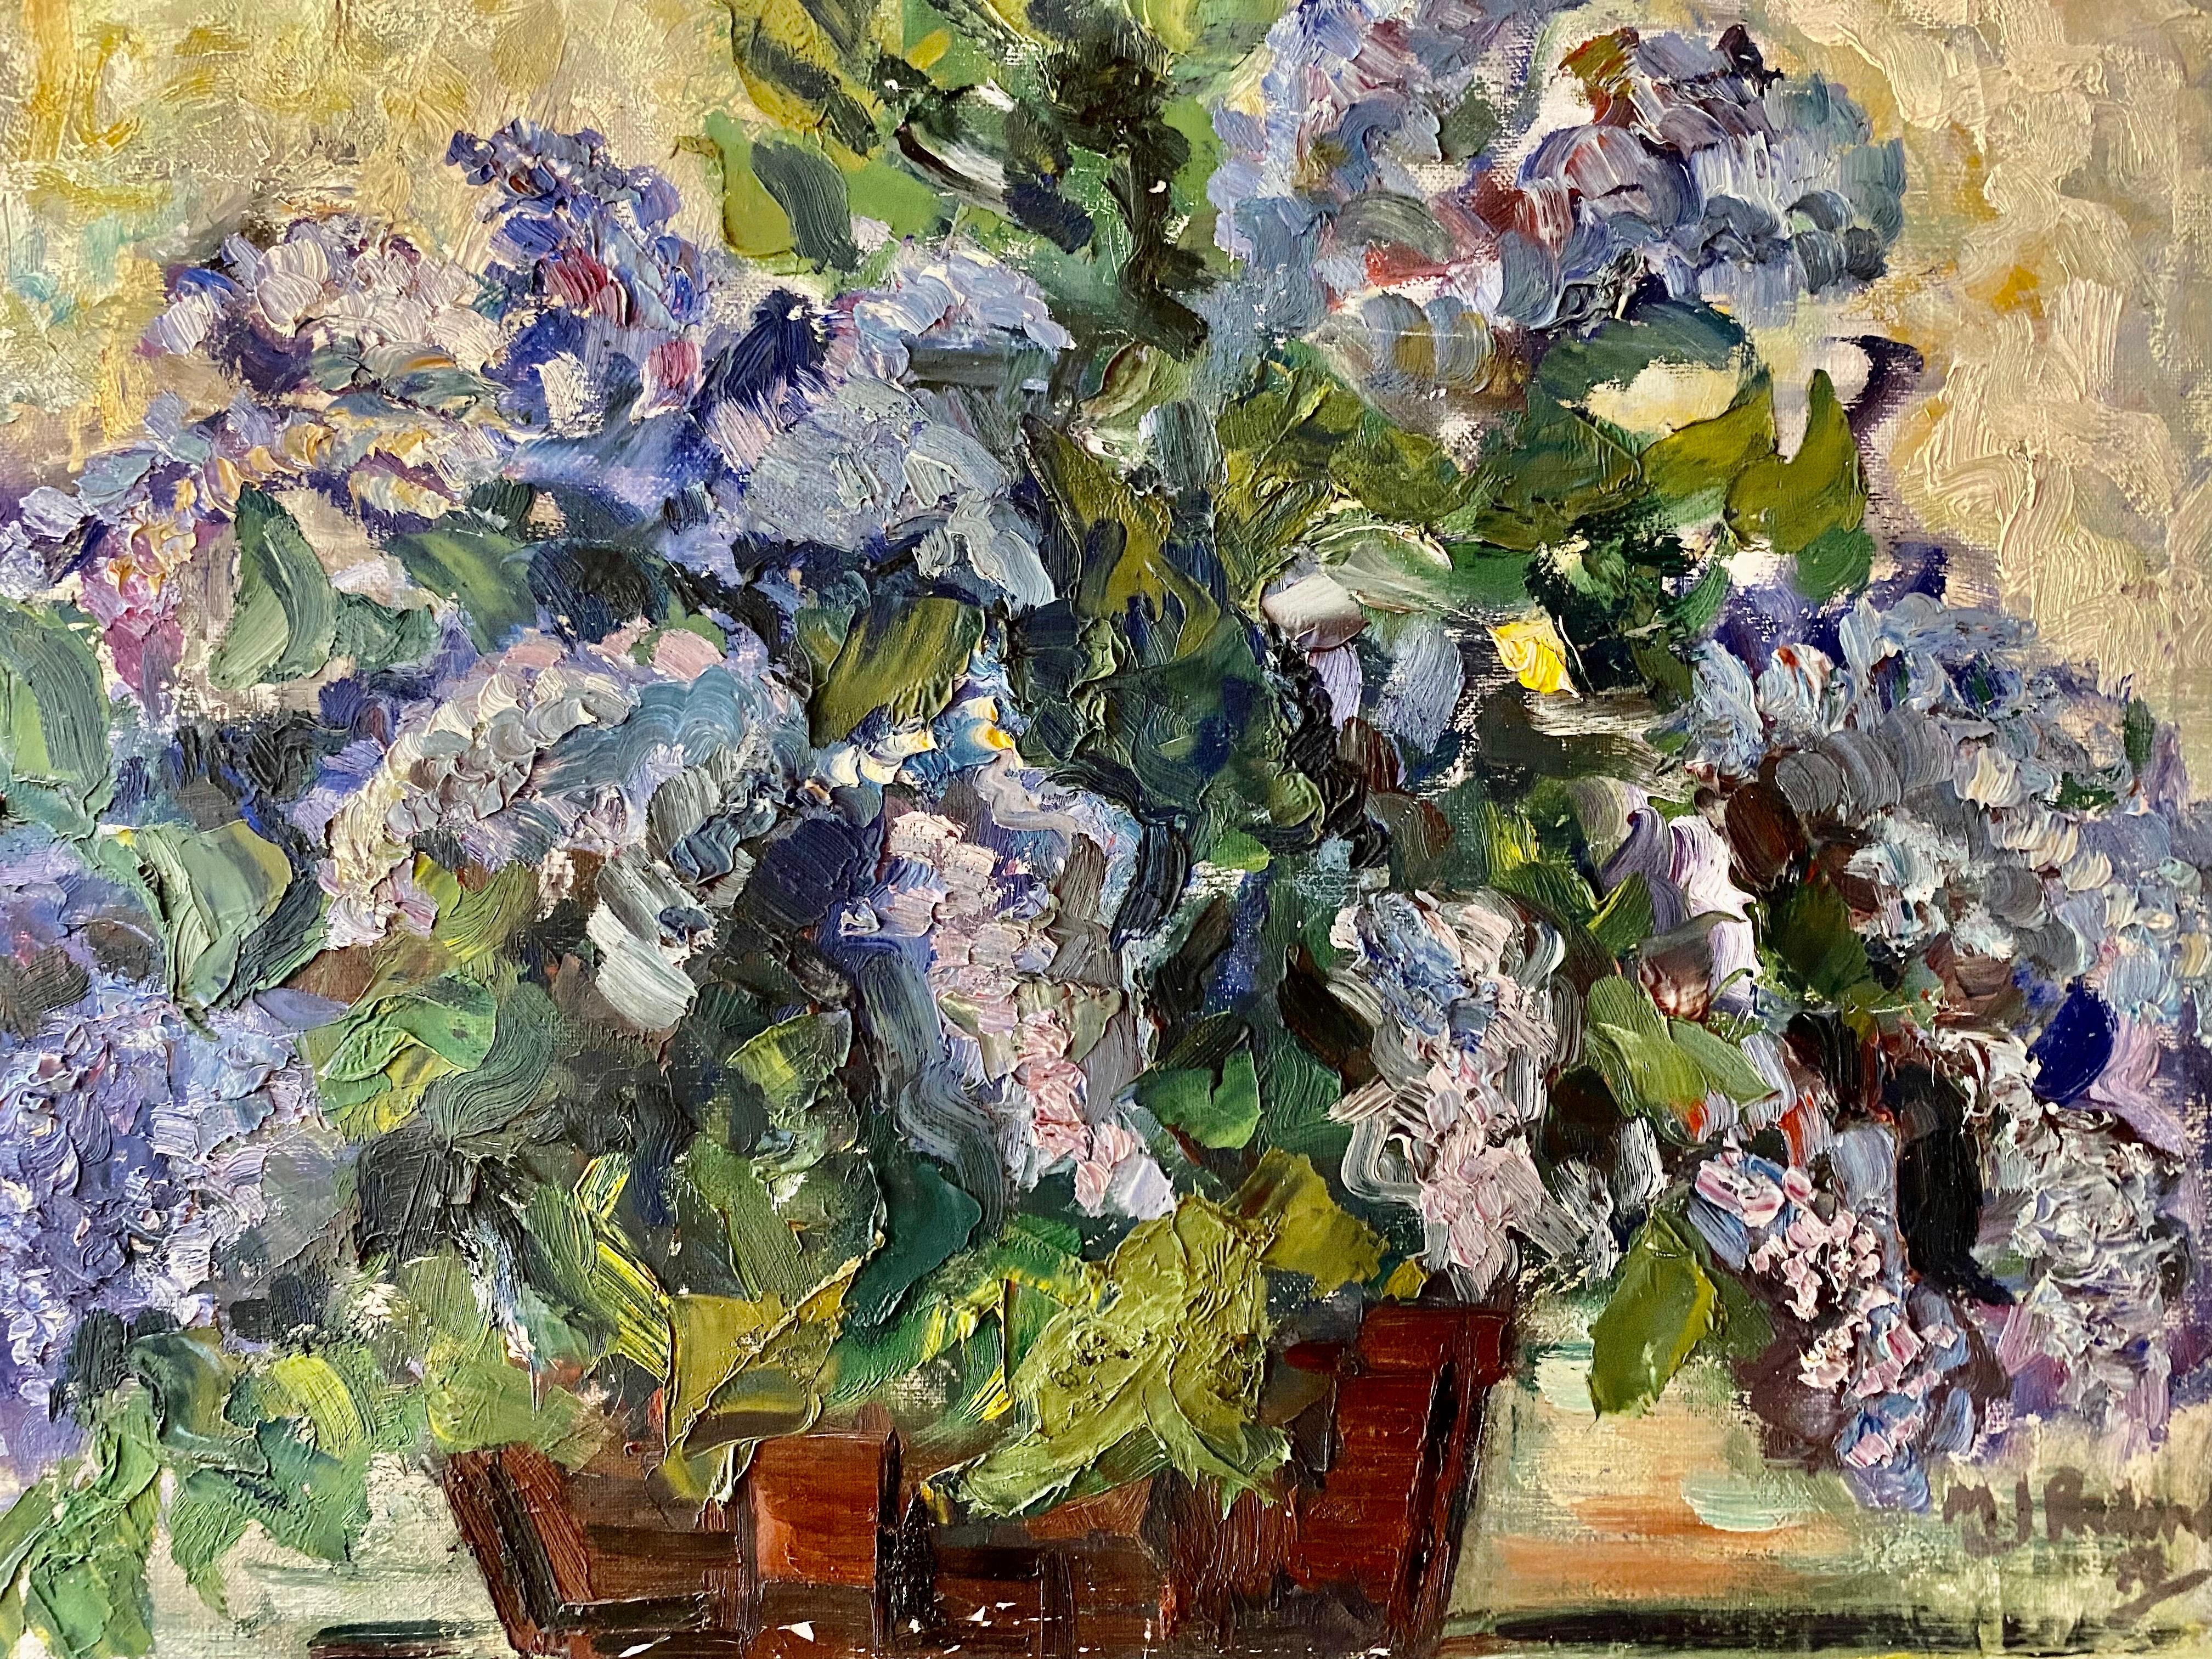 This Spanish still life oil painting captures a scene of a large bouquet of purple and blue lilacs in a brown stained terracotta vase.  He is lying on a fabric, the bouquet is very harmonious, a graceful movement emerges from the stems. The clusters